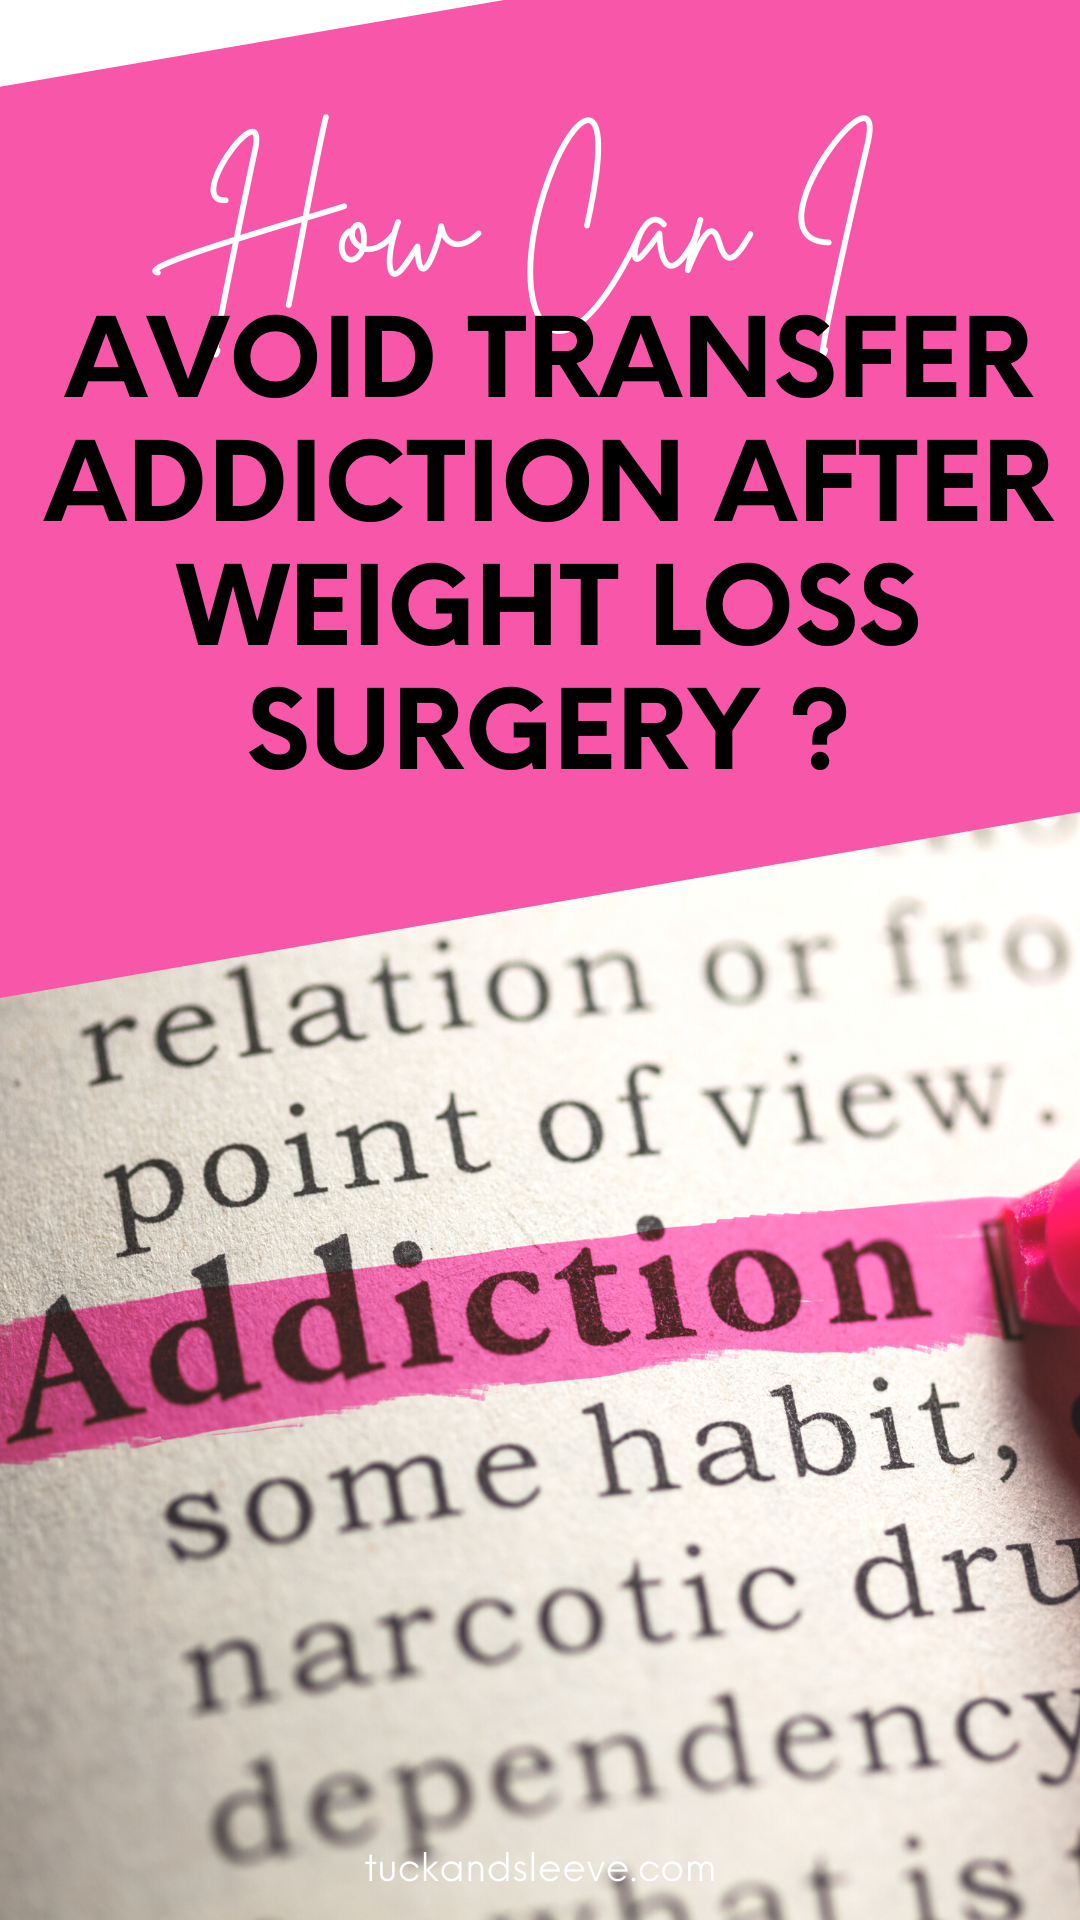 Tuck and Sleeve How Can I Avoid Transfer Addiction After Weight Loss Surgery?